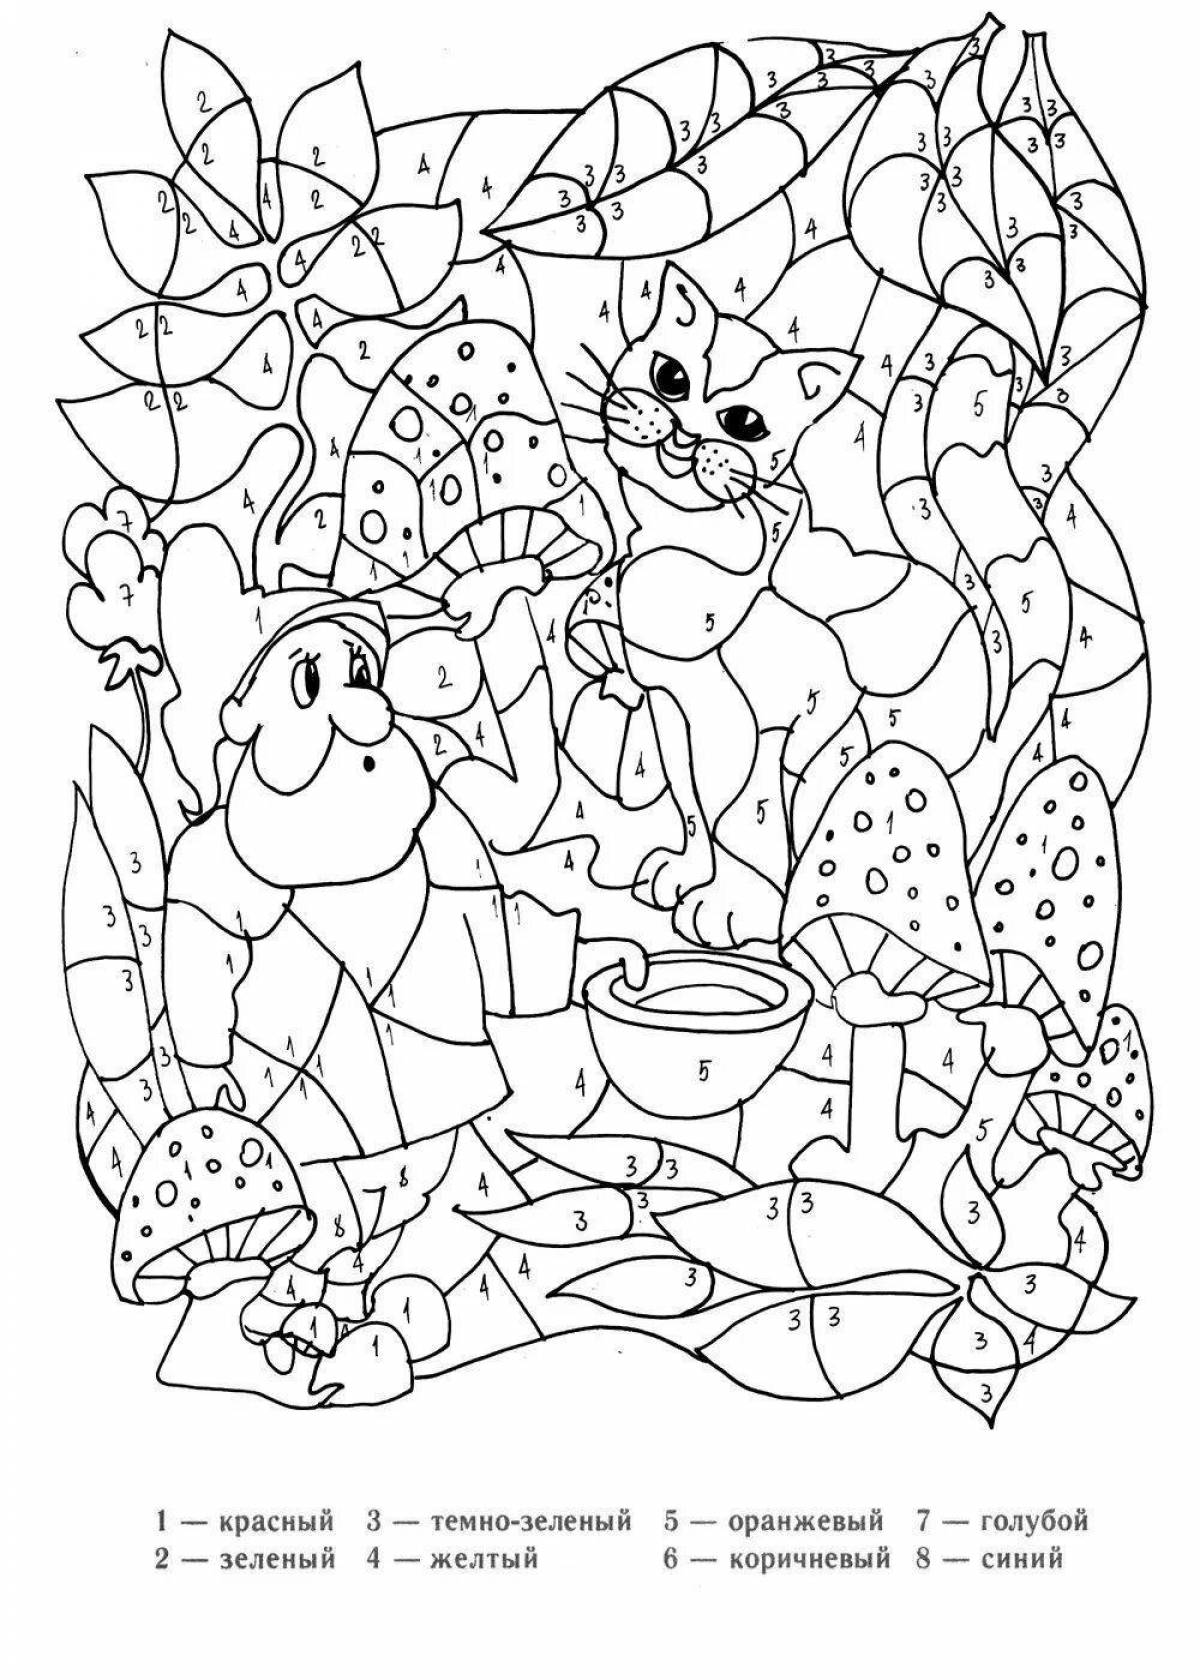 Radiant coloring page fairy tales by numbers